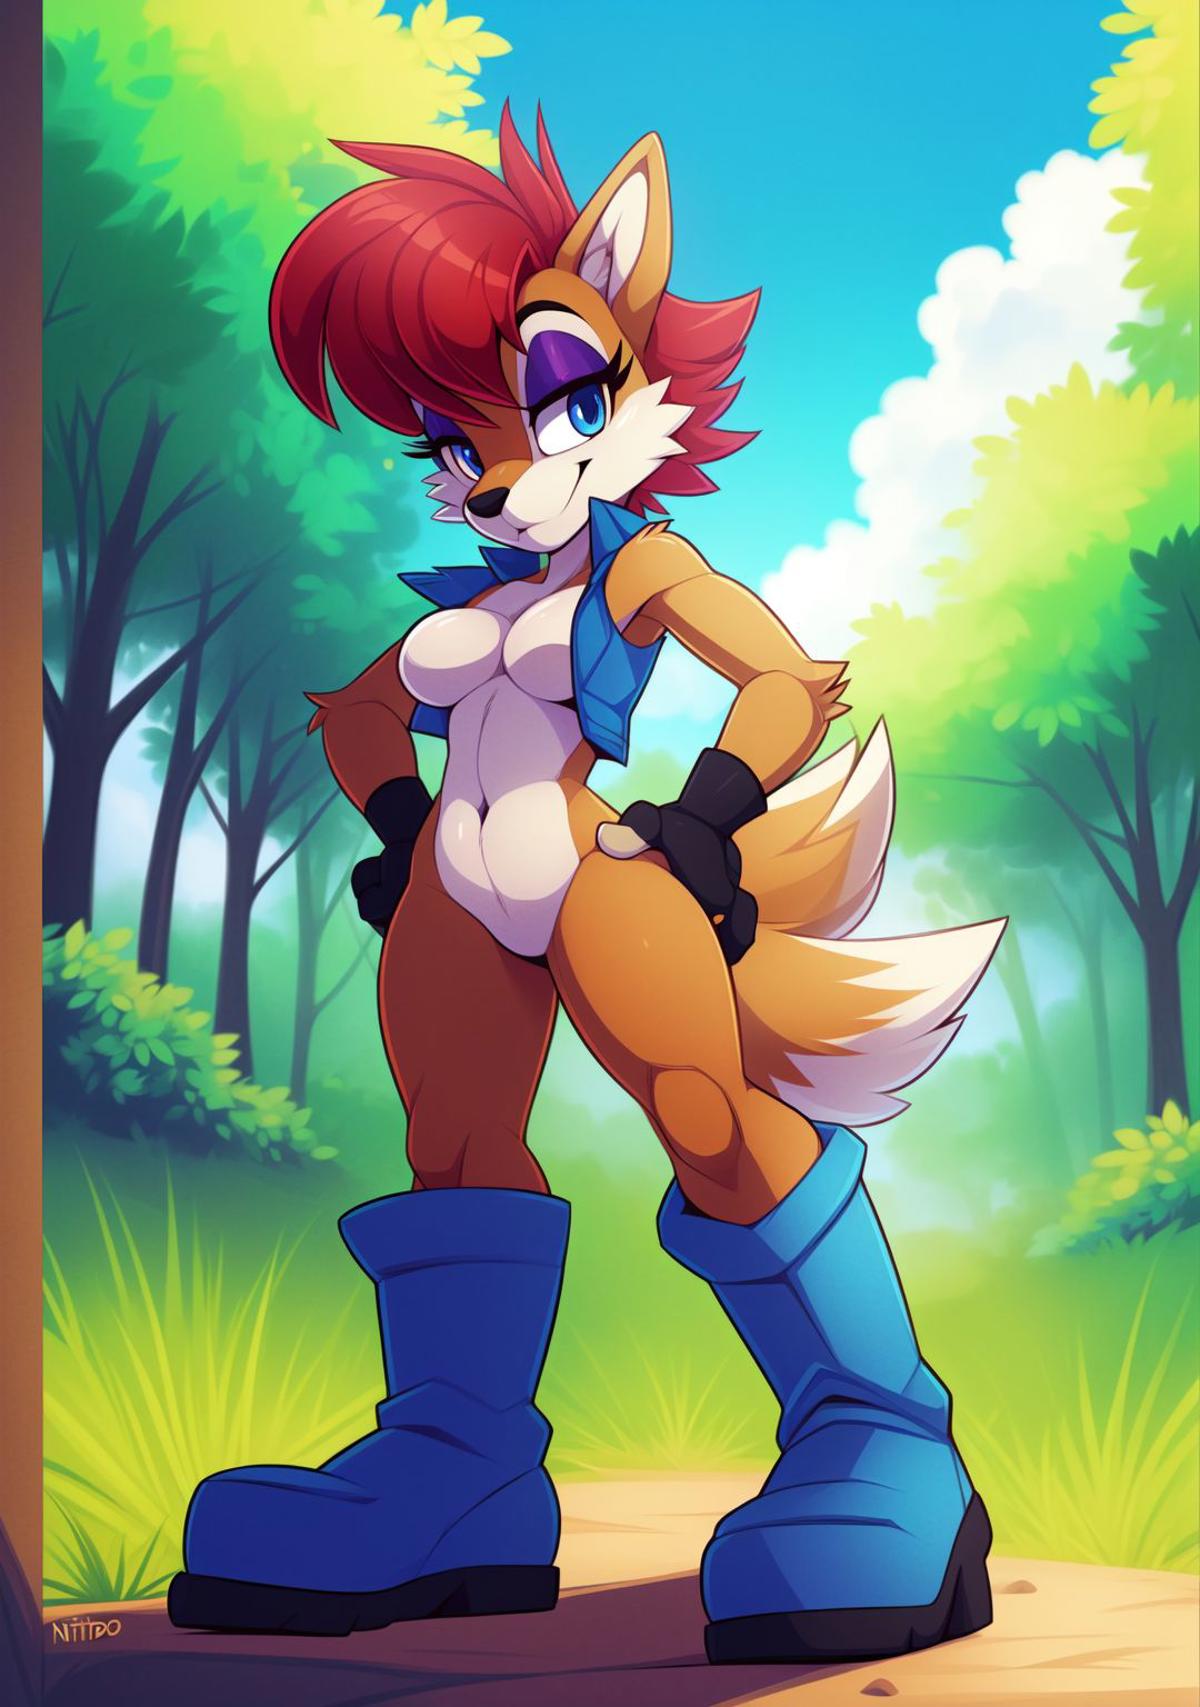 Sally Acorn image by marusame